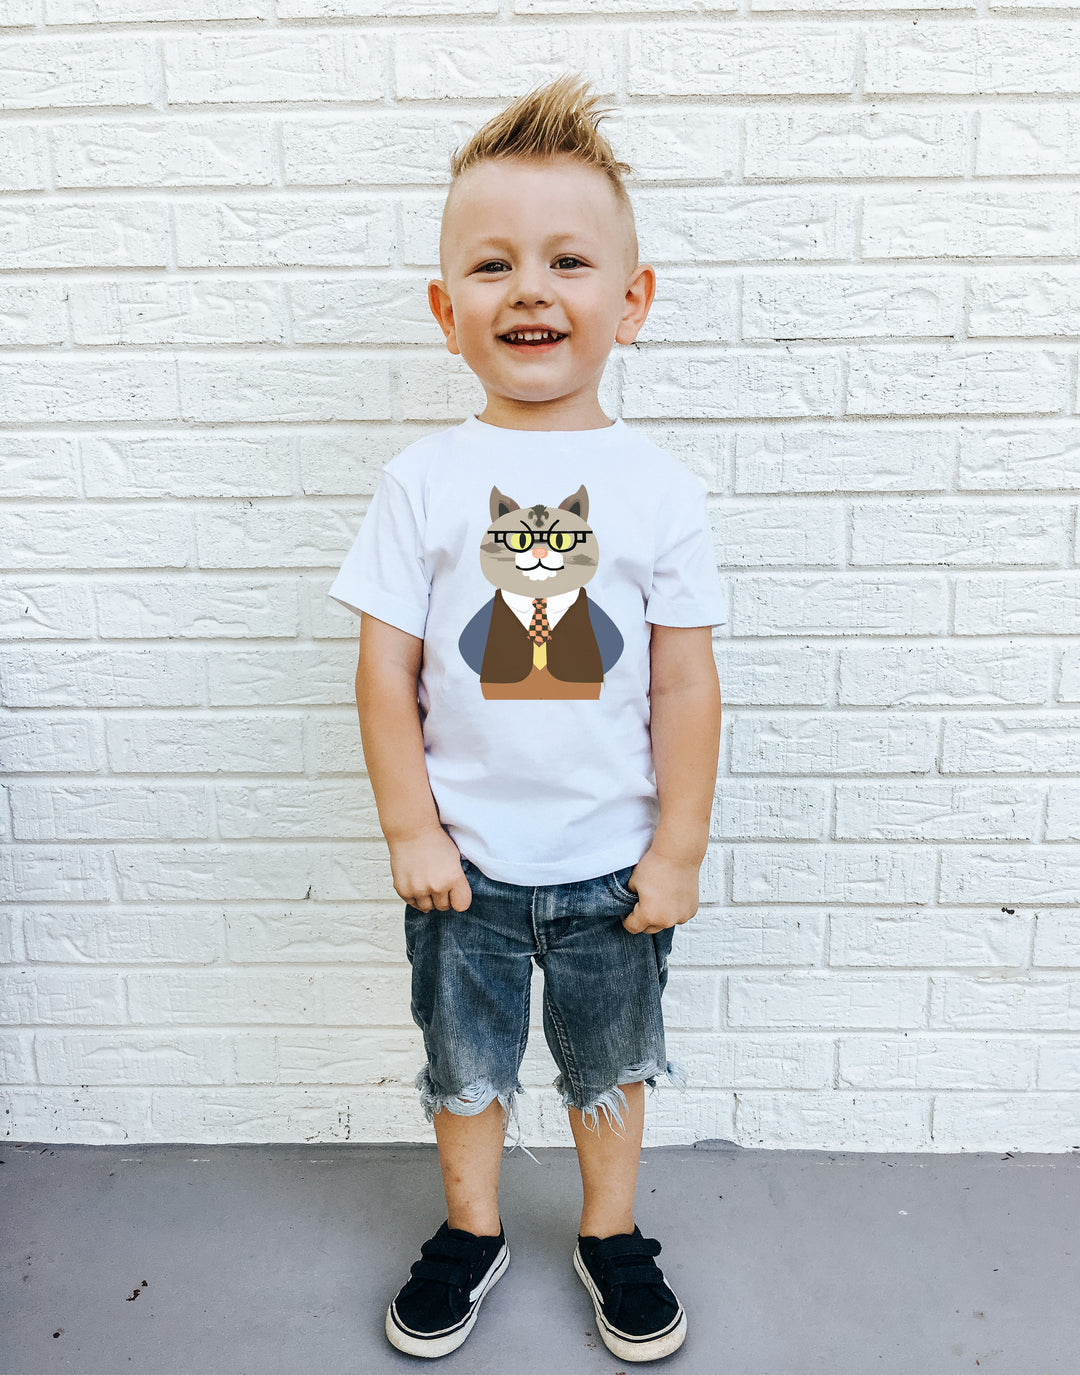 The Librarian 2. Short Sleeve T-shirt for Toddler and Kids - TeesForToddlersandKids -  t-shirt - seasons, summer, surf - librarian-cat-short-sleeve-t-shirt-for-toddler-and-kids